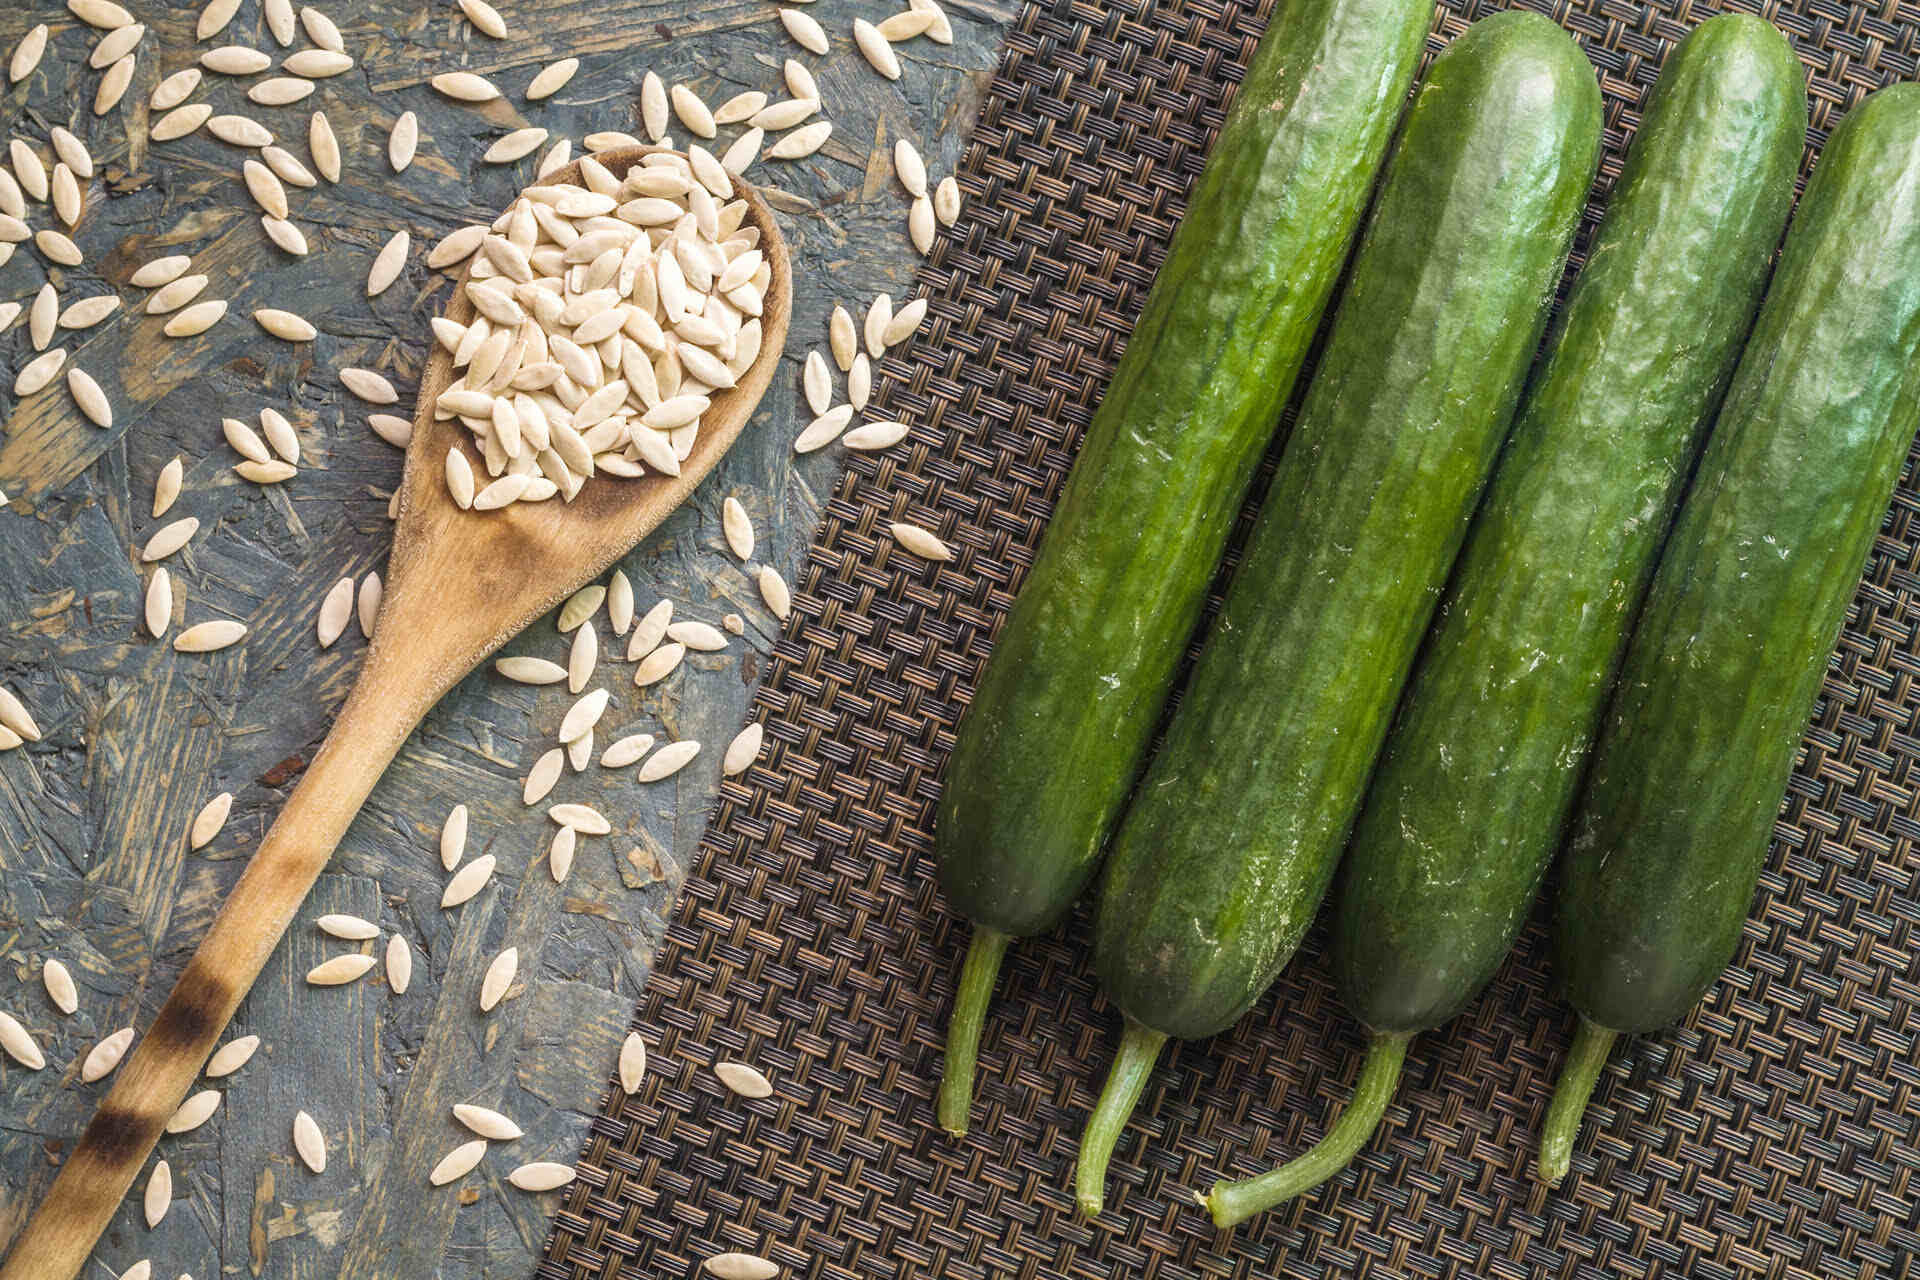 How To Store Cucumber Seeds